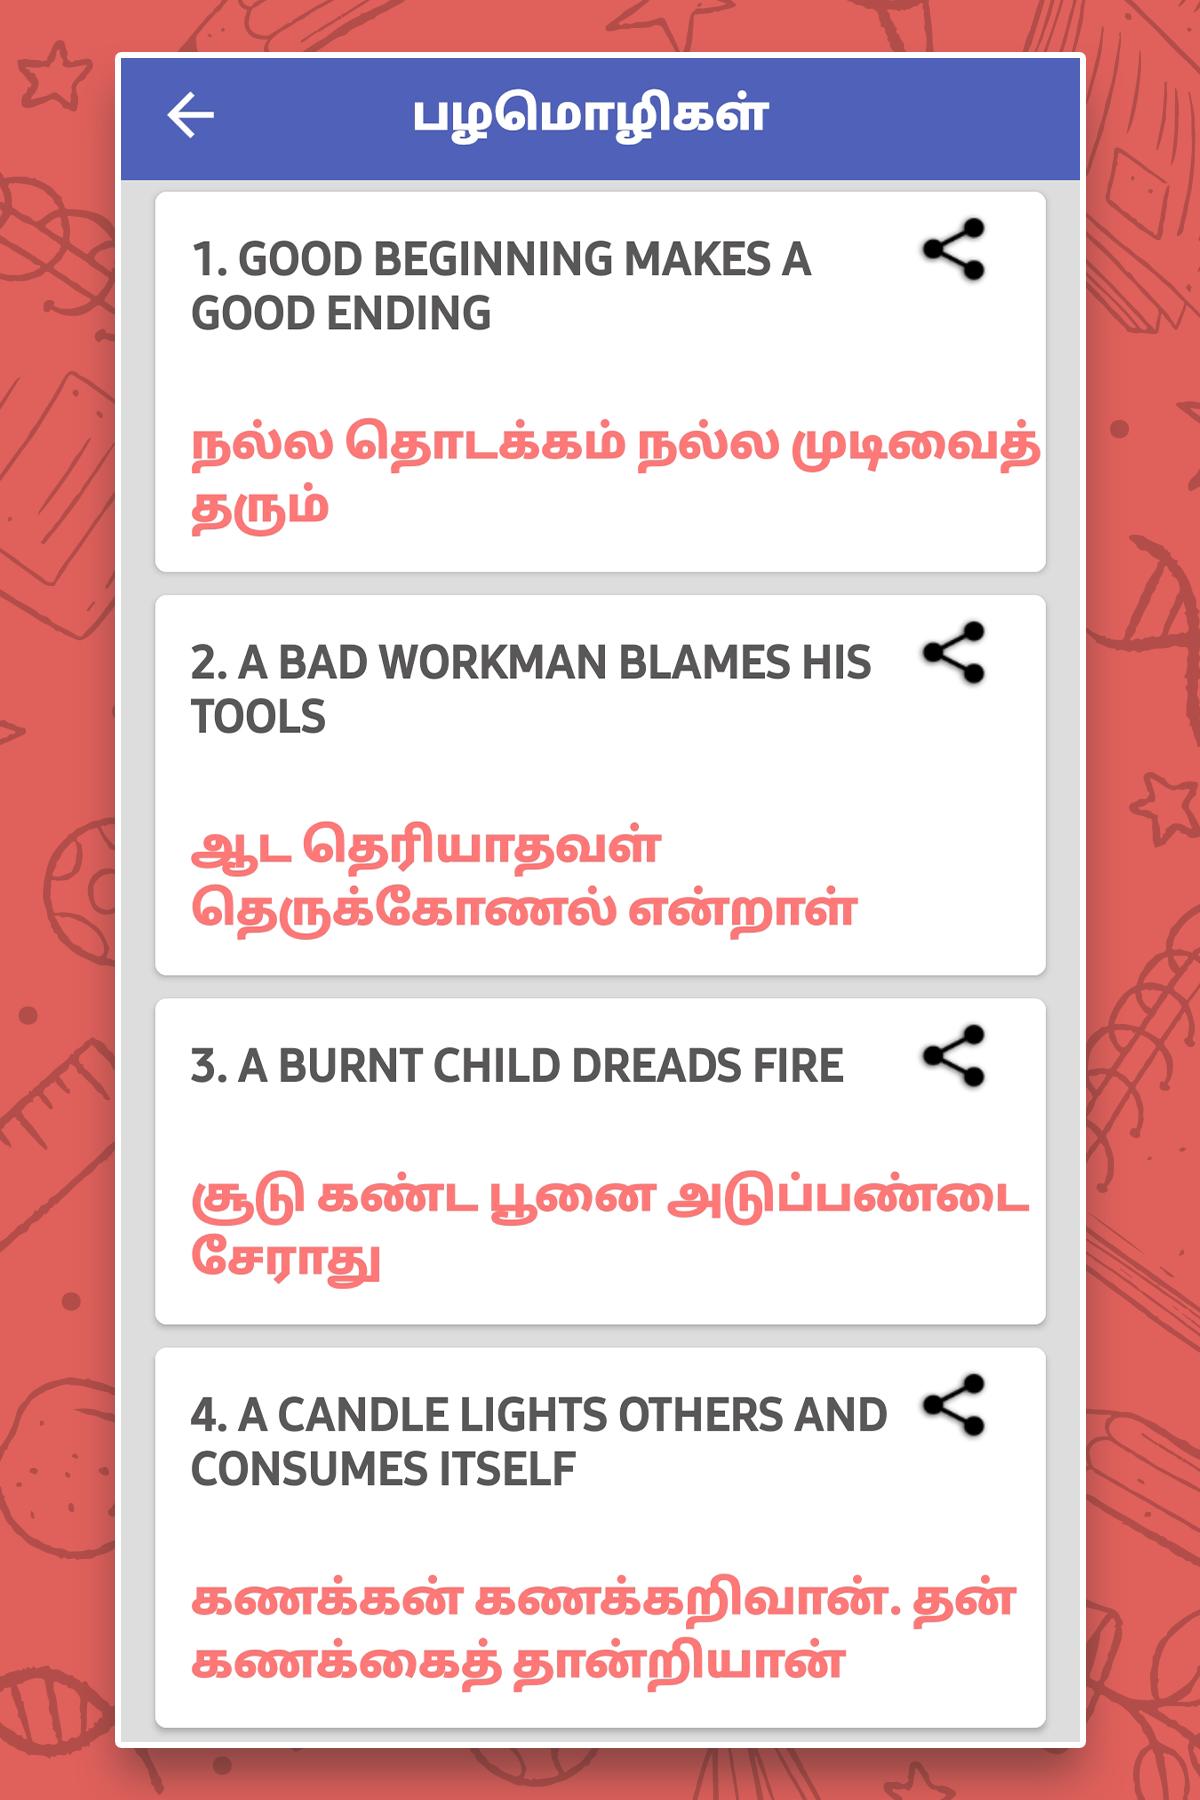 English To Tamil Dictionary For Android Apk Download Just visit this tamil dictionary webpage from your mobile phone and simply start searching. english to tamil dictionary for android